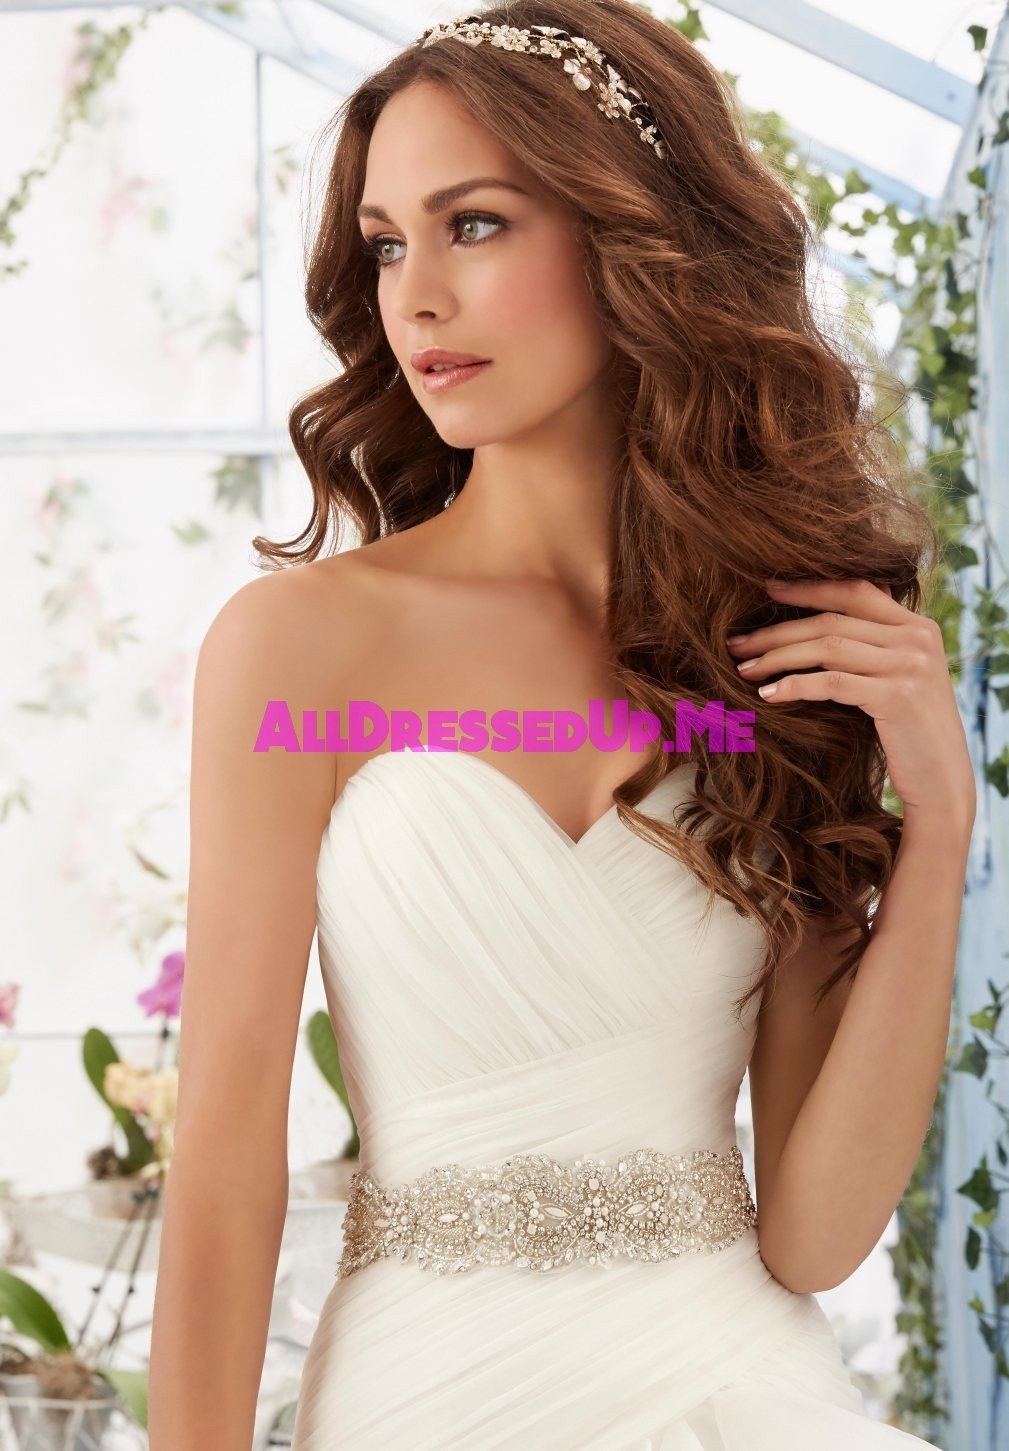 ML Accessories - 11231 - All Dressed Up, Bridal Belt - Morilee - Chattanooga TN's All Dressed Up Bridal Shop / Bridal Boutique offers Wedding Gowns, Prom Dresses & Tuxedo Rentals